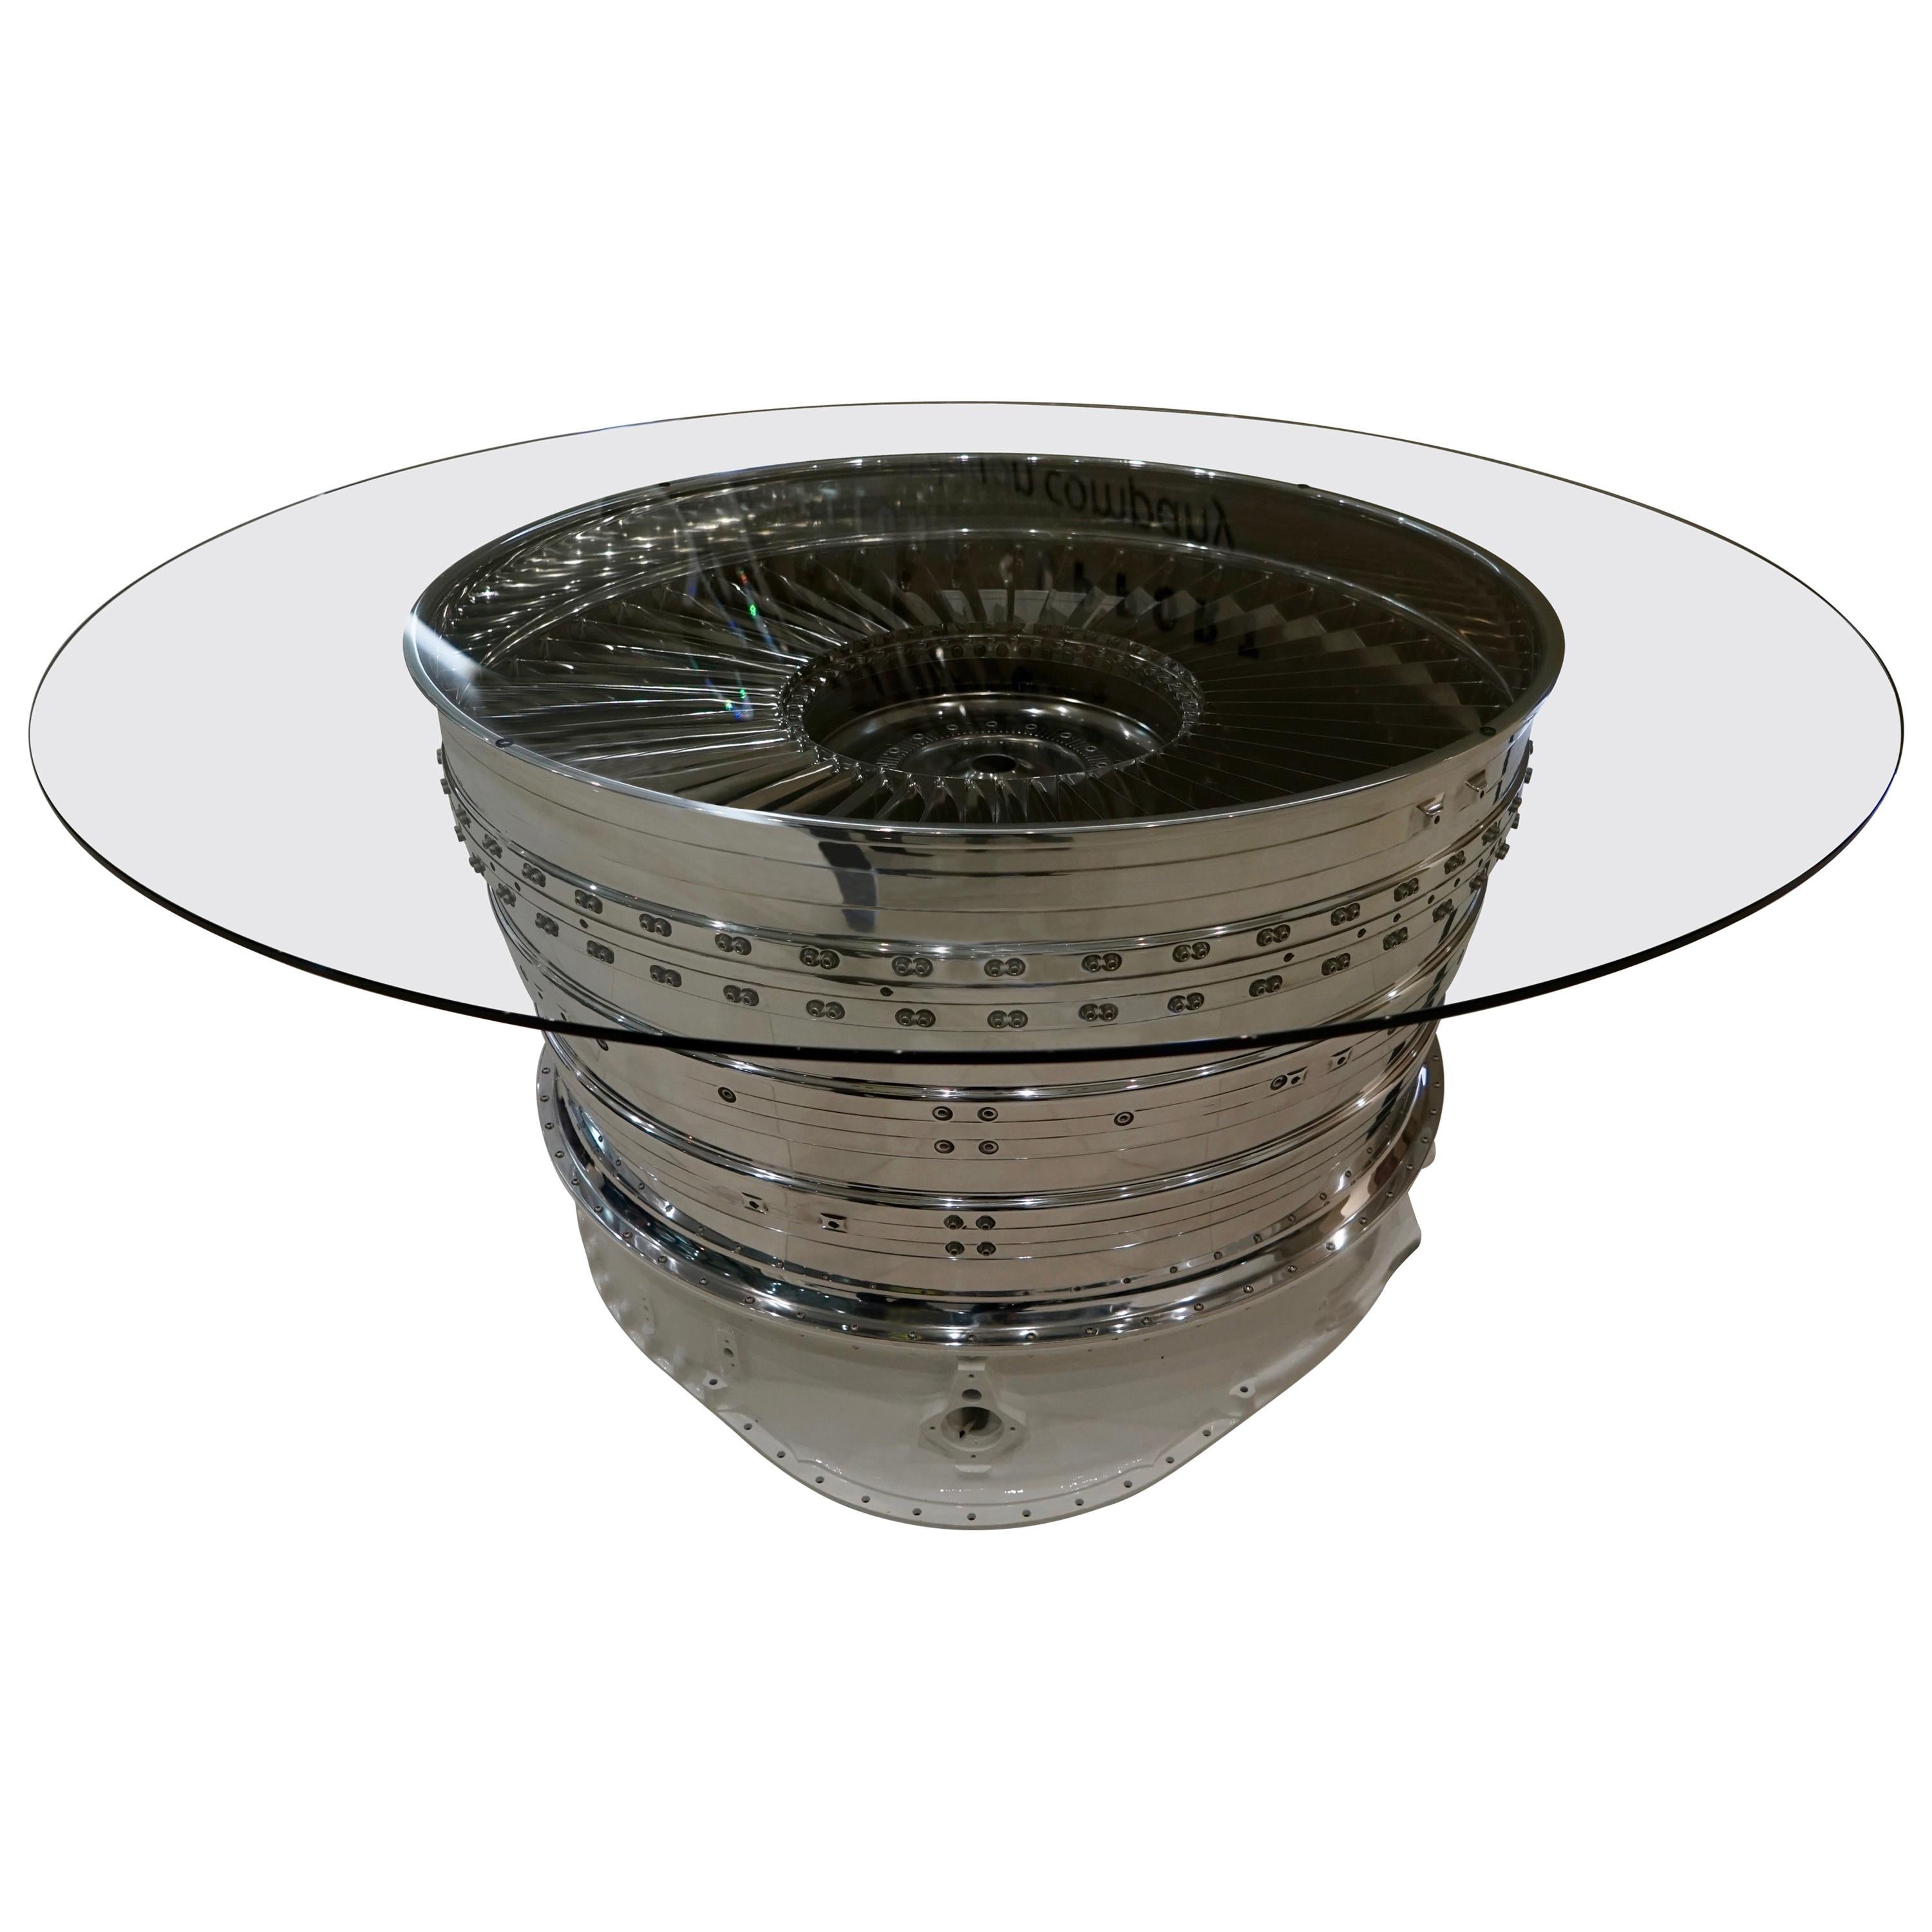 Rolls Royce Jump Jet Rotating Turbine Dining / Conference Table For Sale